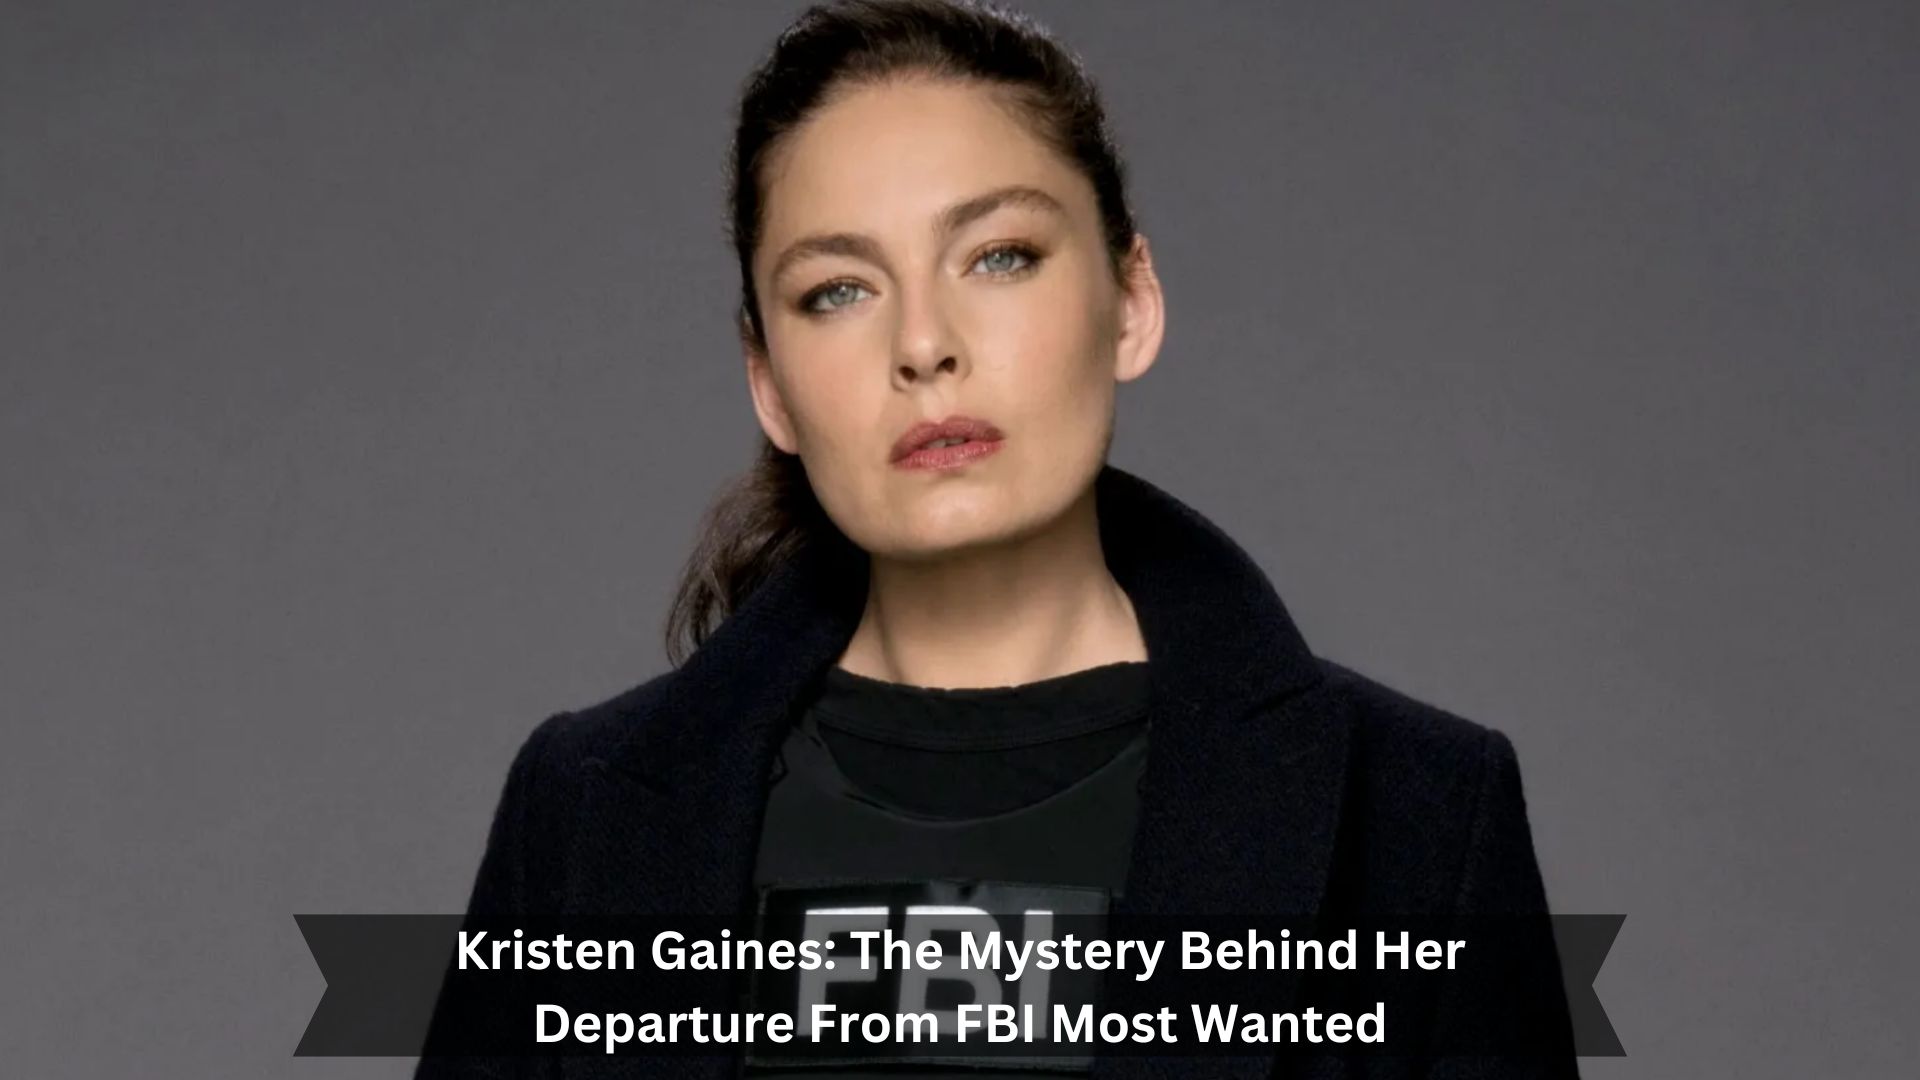 Kristen-Gaines-The-Mystery-Behind-Her-Departure-From-FBI-Most-Wanted